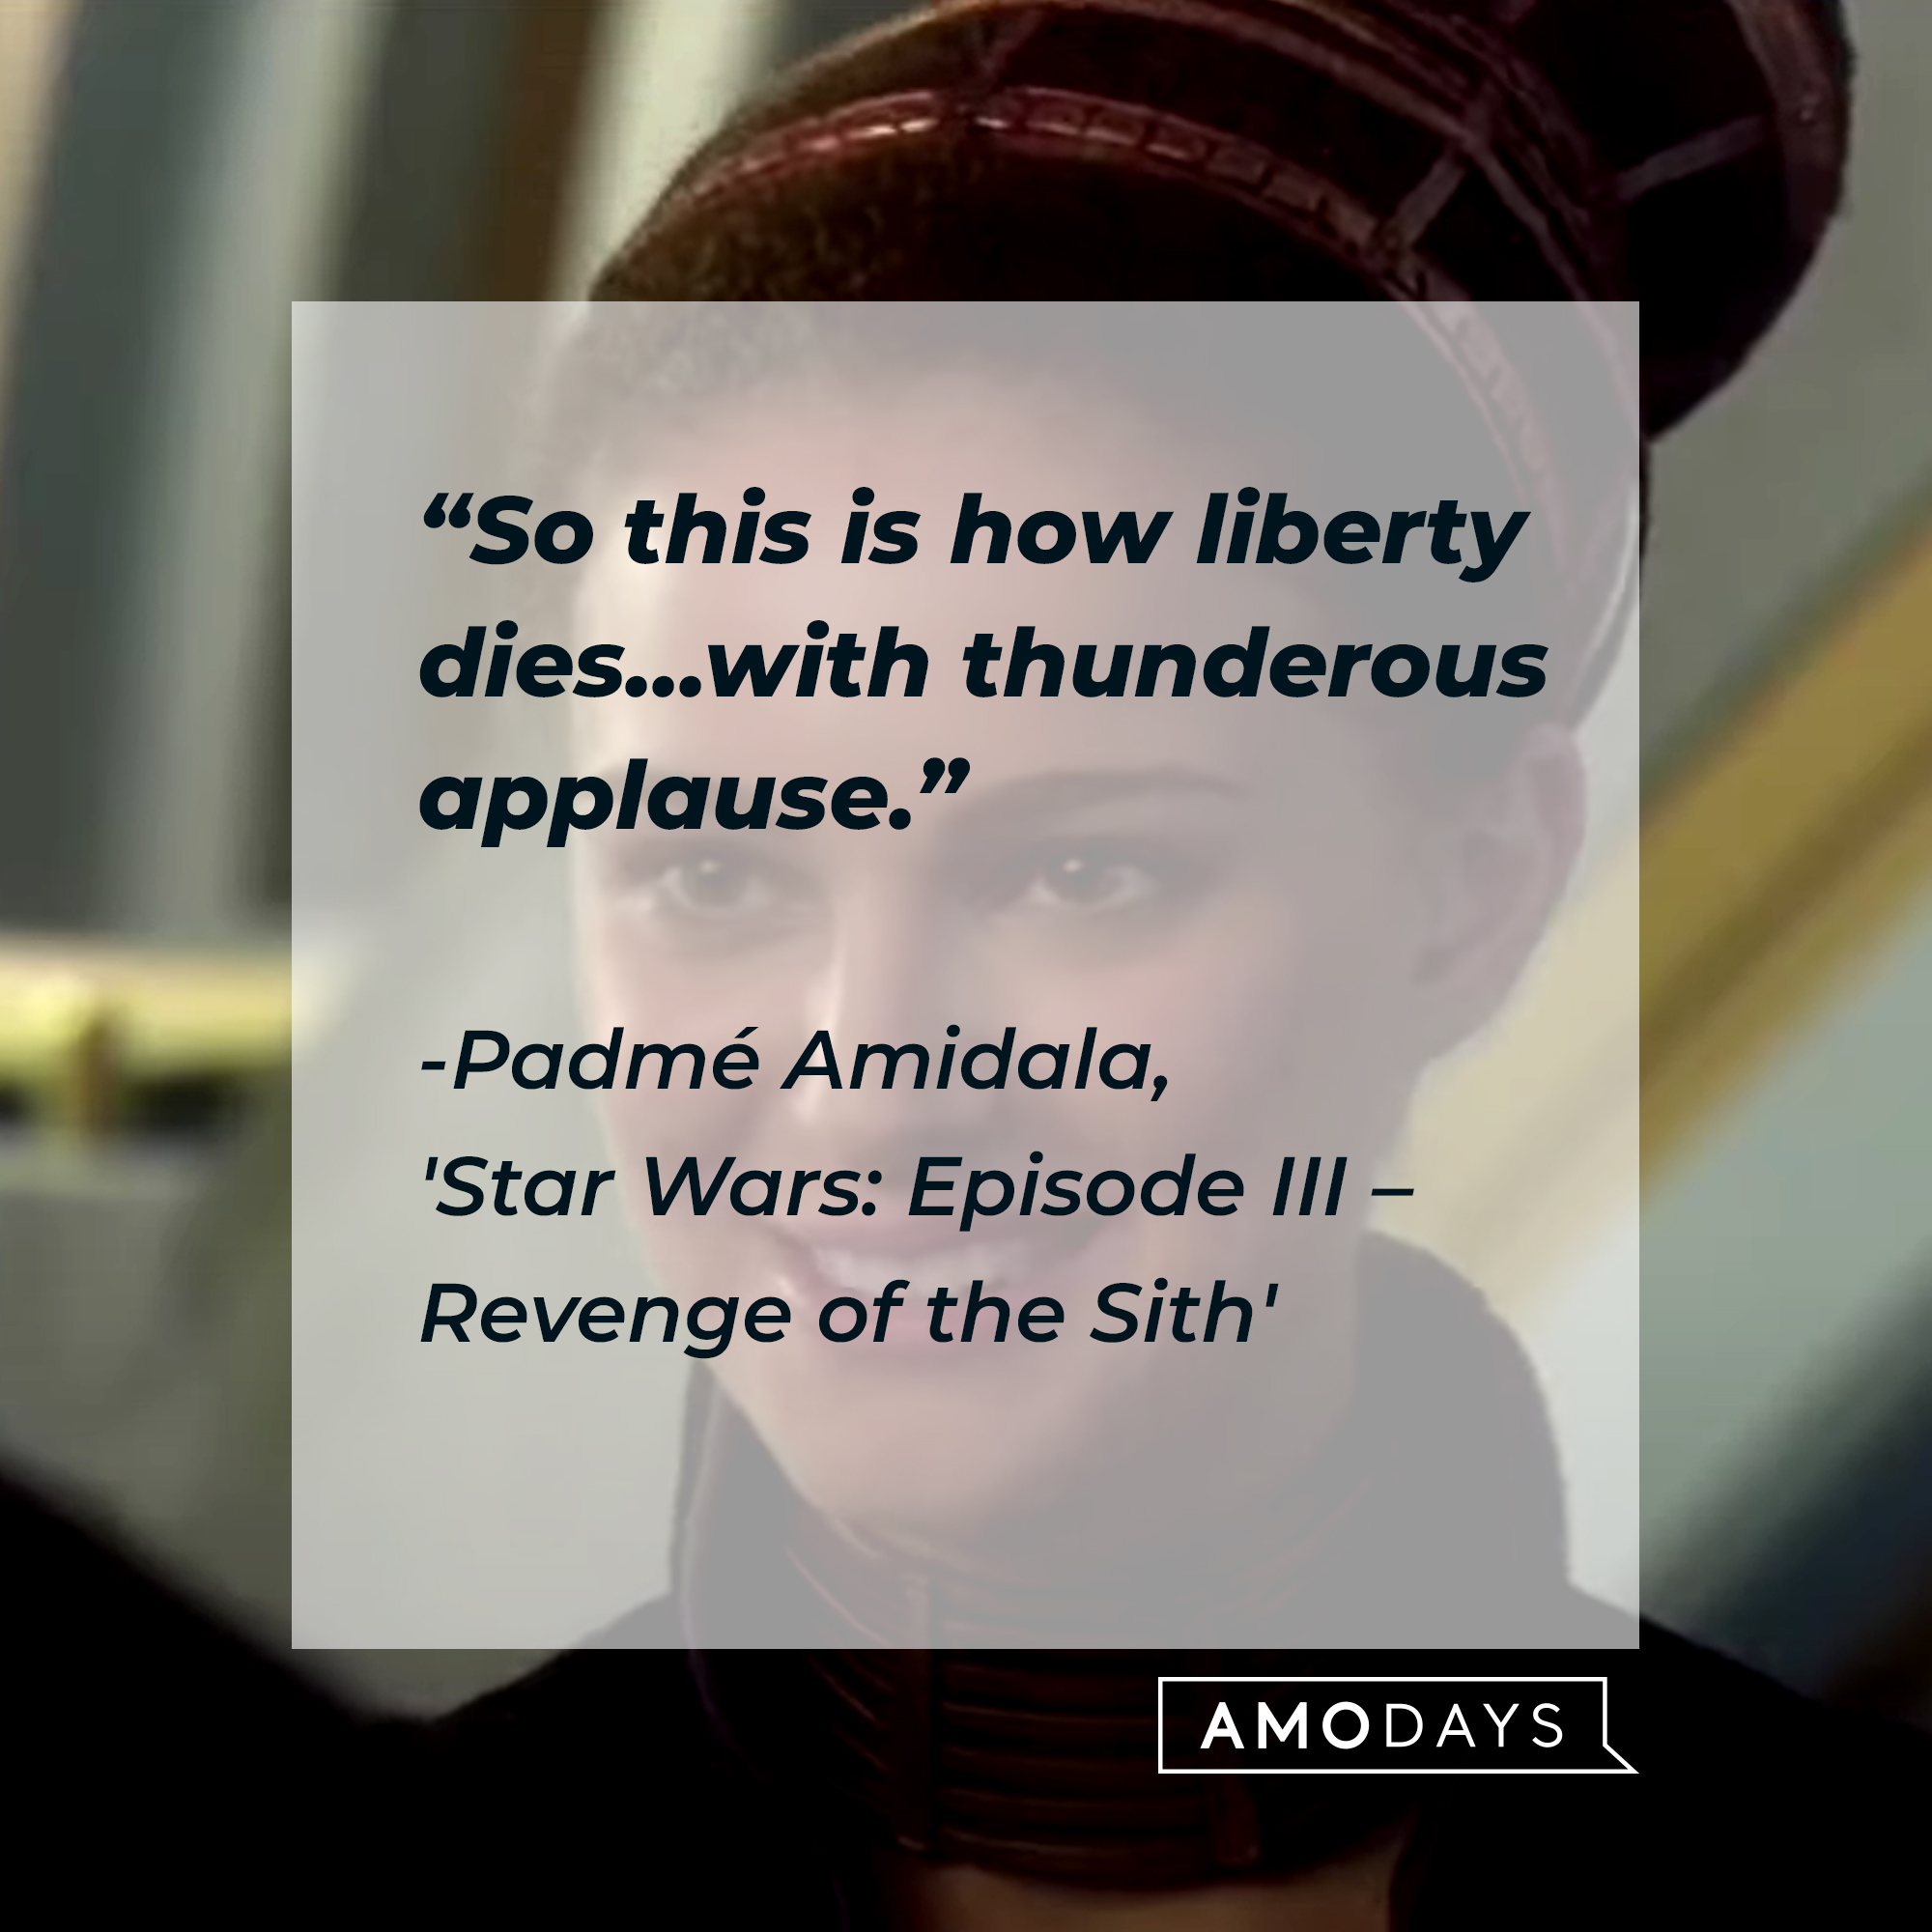 Padmé Amidala with her quote: "So this is how liberty dies... with thunderous applause." | Source: Facebook.com/StarWars